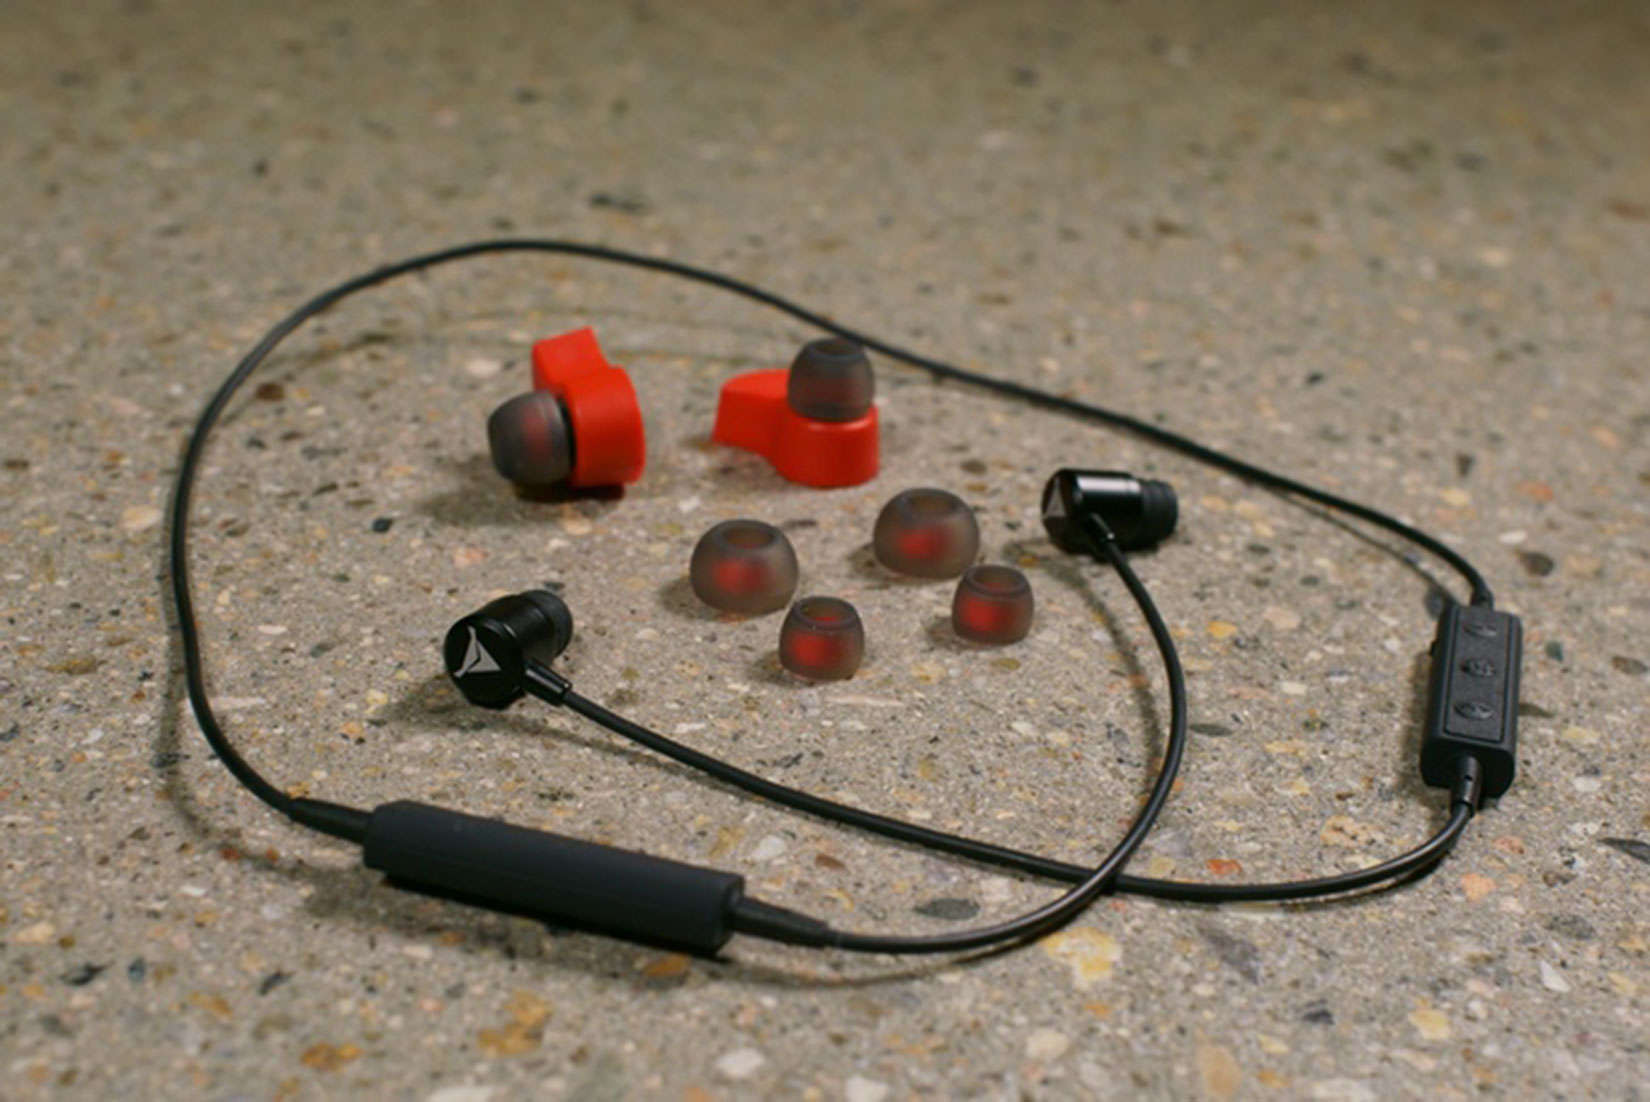 Decibullz brings its moldable earpieces to wireless earbuds.